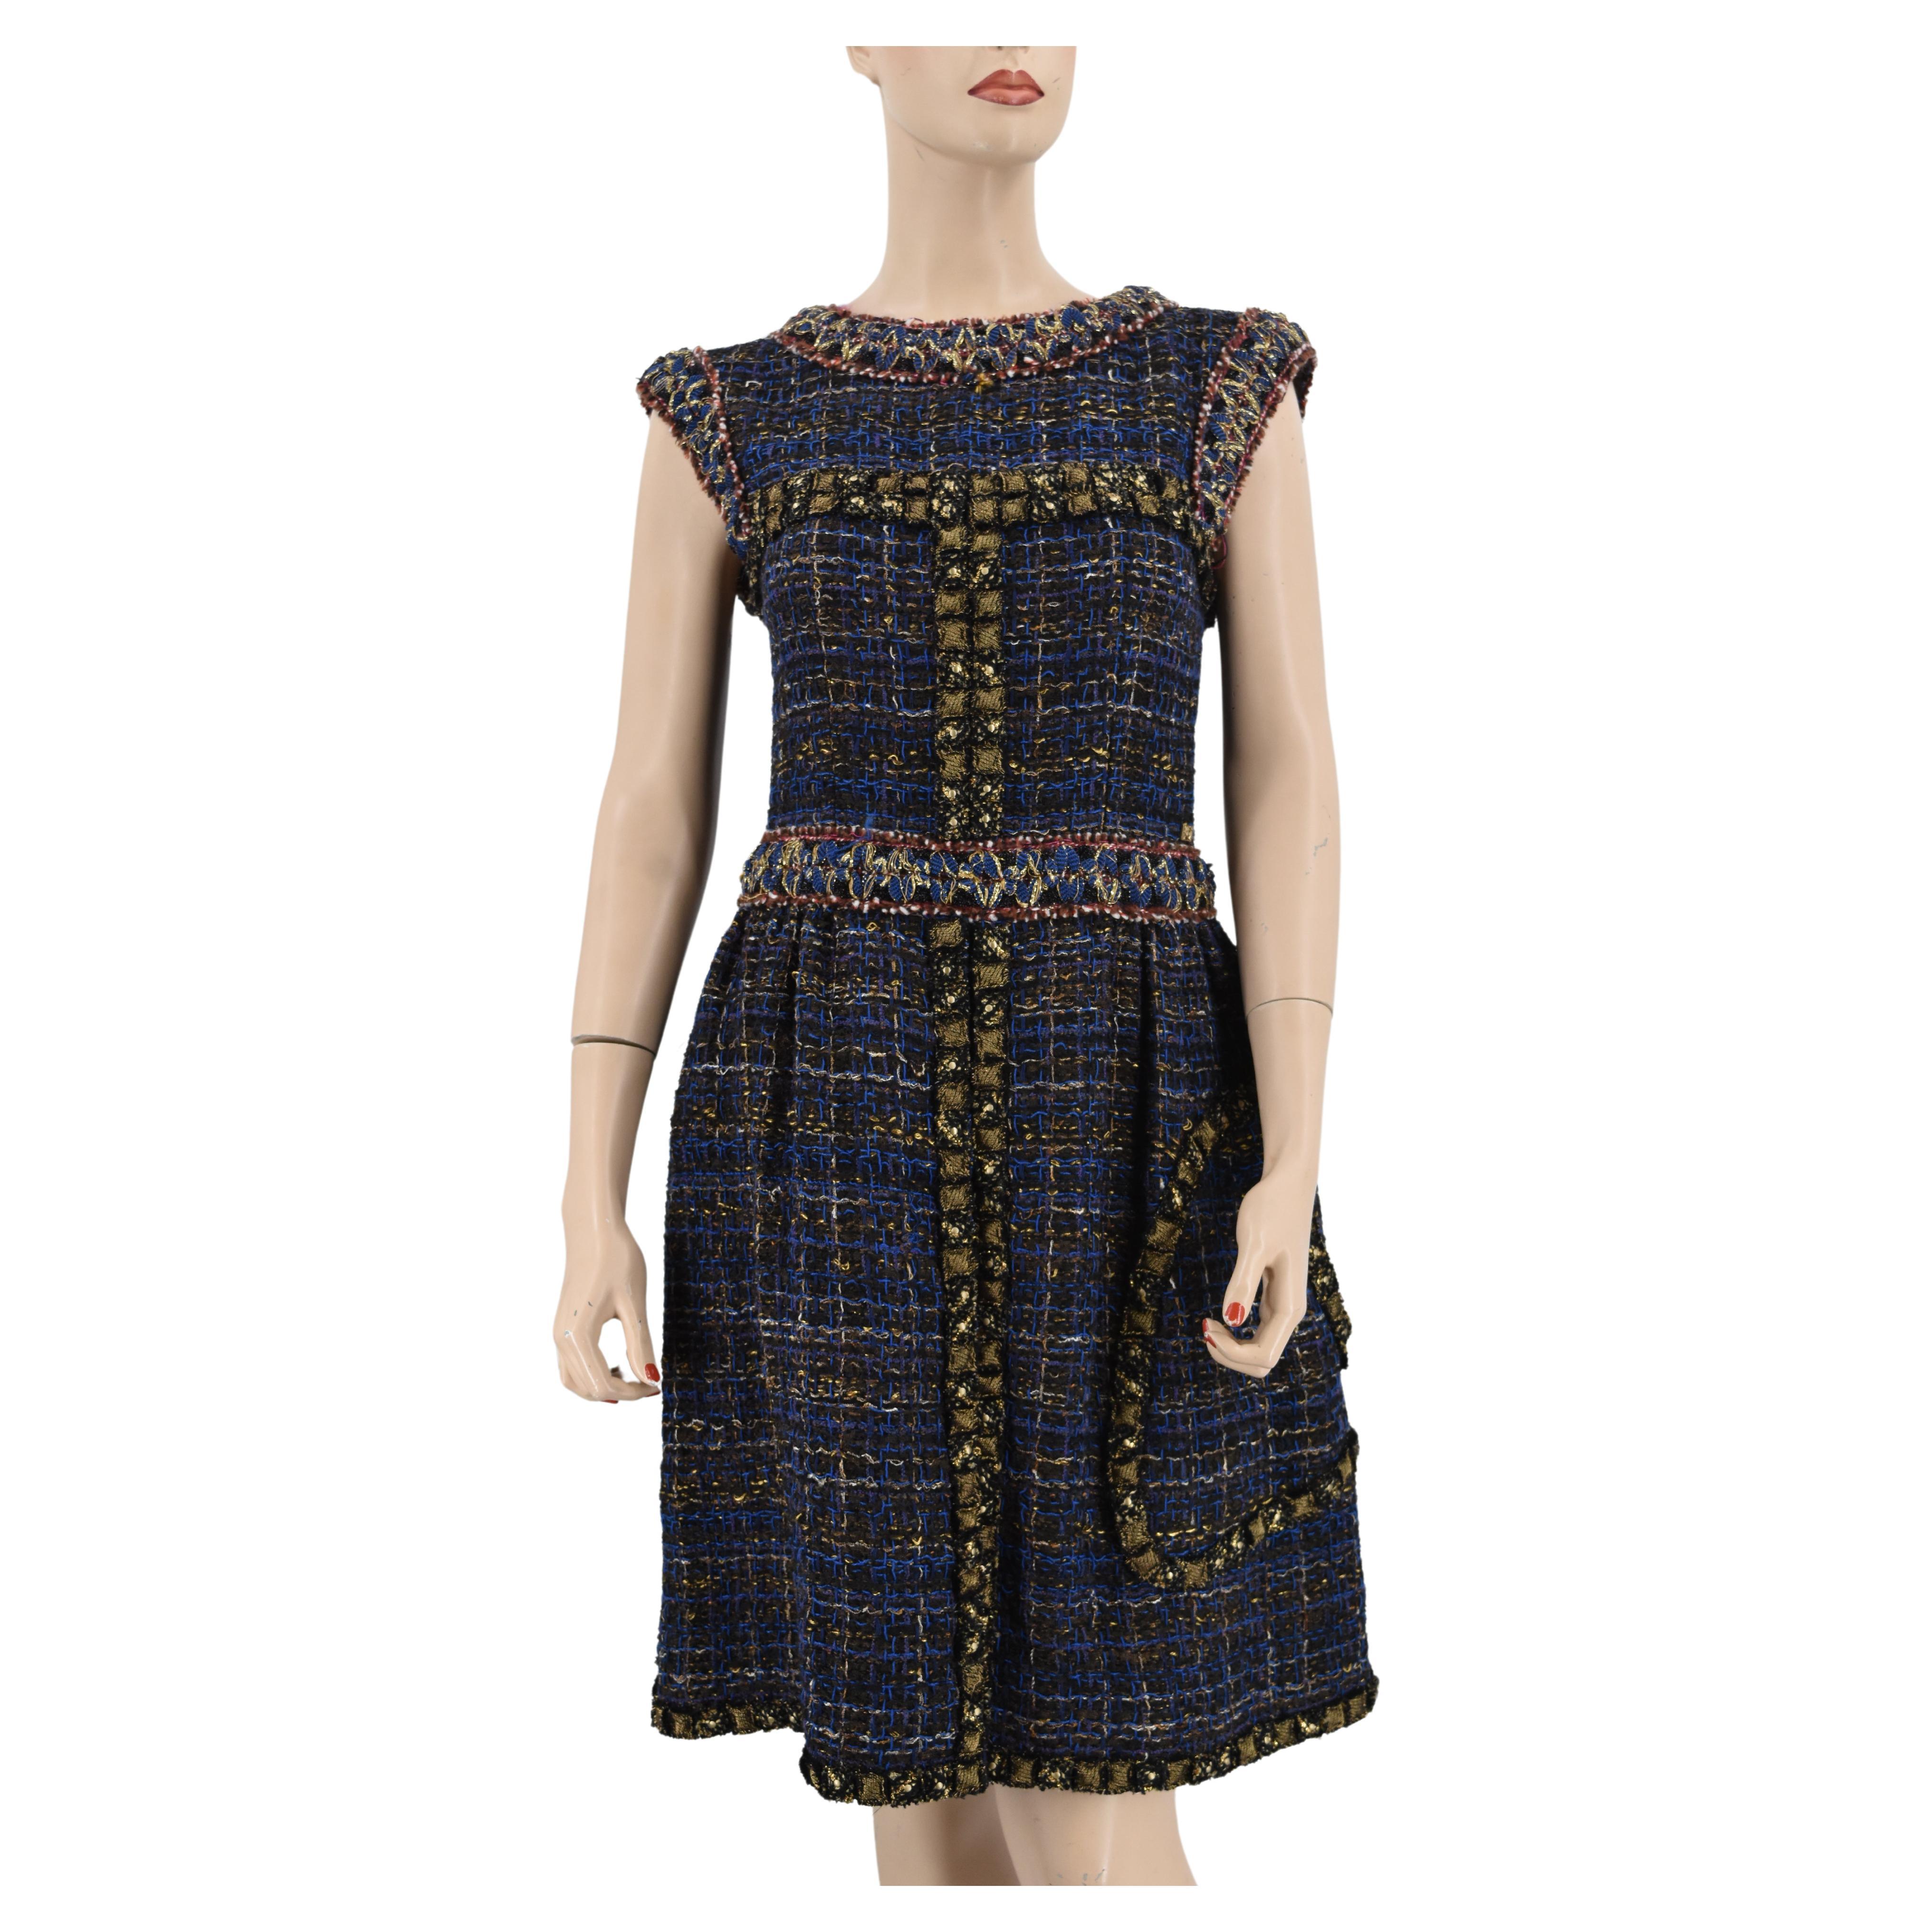 Chanel NWT 11A Fall 2011 Tweed Dress with CC logo 36 Rare New For Sale